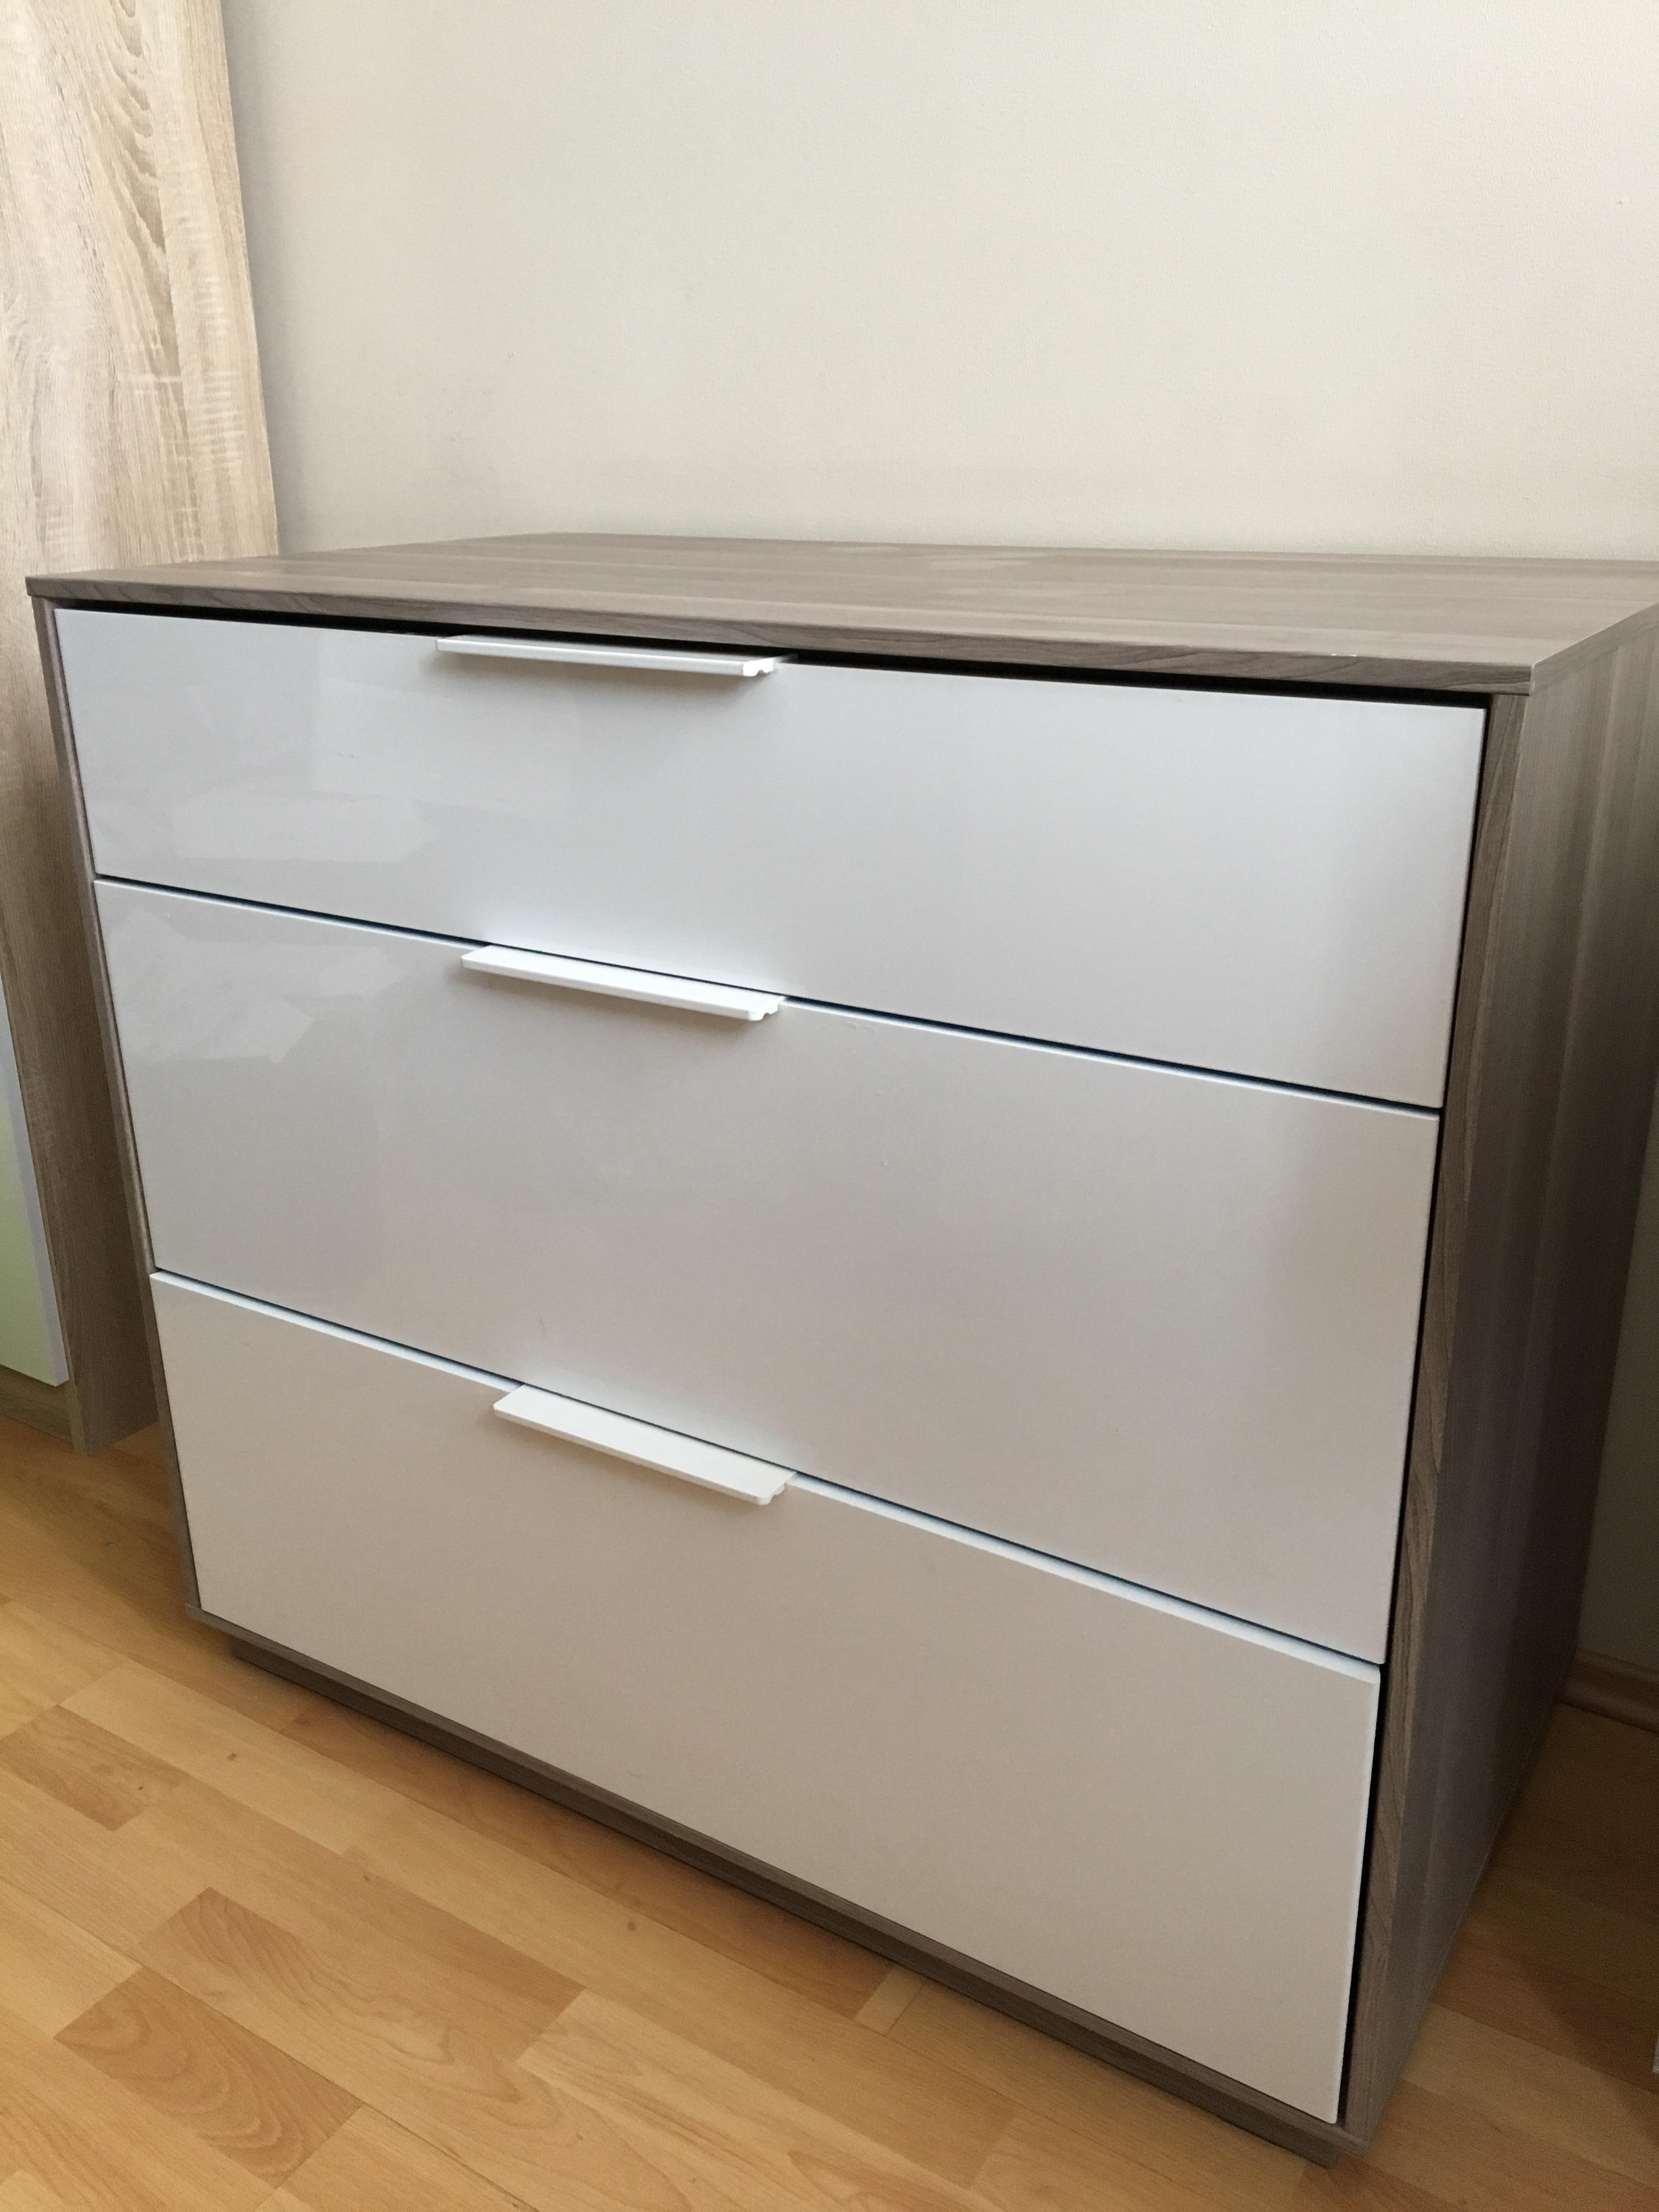 Nyvoll Ikea Kommode Schlafzimmer In Dresden For 80 00 For Sale